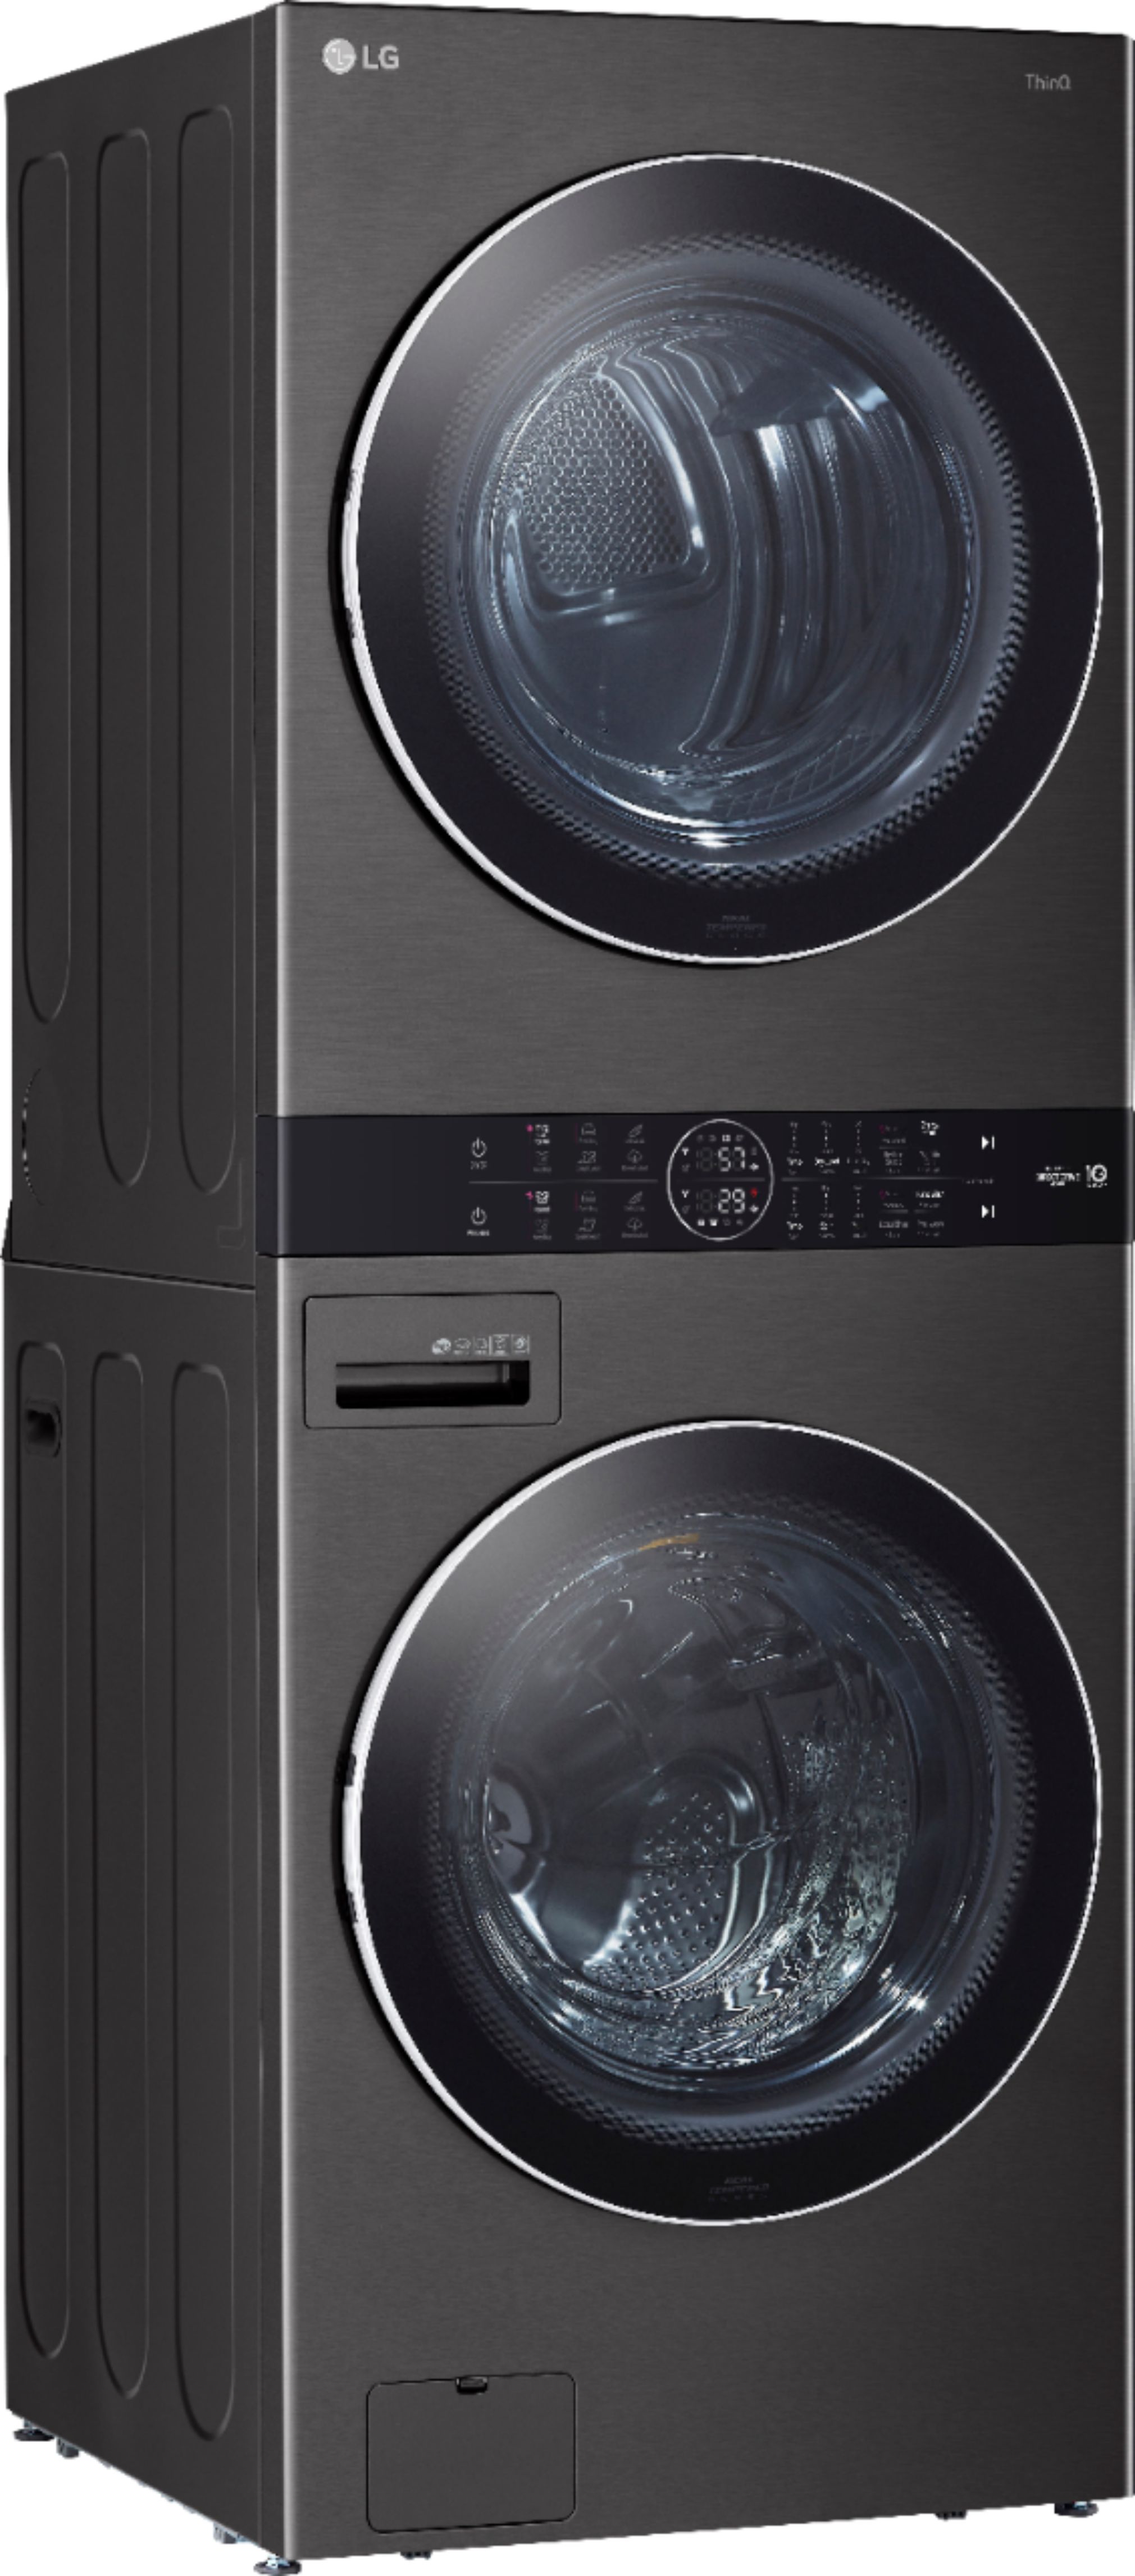 Angle View: LG - 4.5 Cu. Ft. HE Smart Front Load Washer and 7.4 Cu. Ft. Gas Dryer WashTower with Steam and Built-In Intelligence - Black Steel